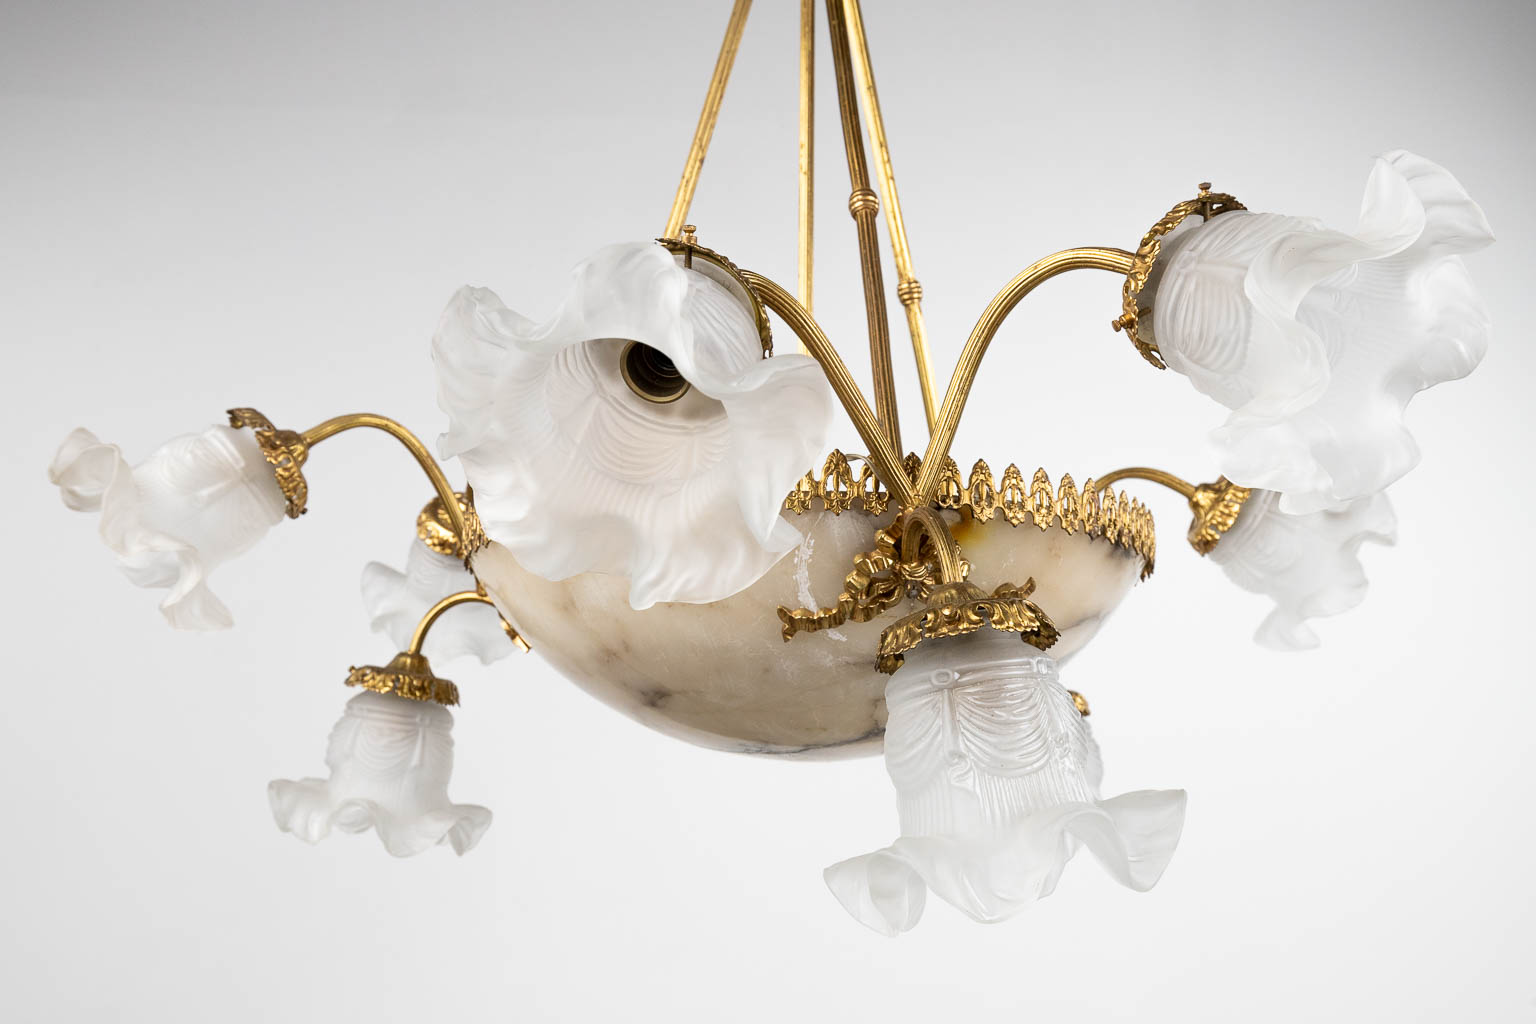 A chandelier made of bronze with an alabaster bowl and glass shades. (H: 64 x D: 80 cm) - Image 4 of 12